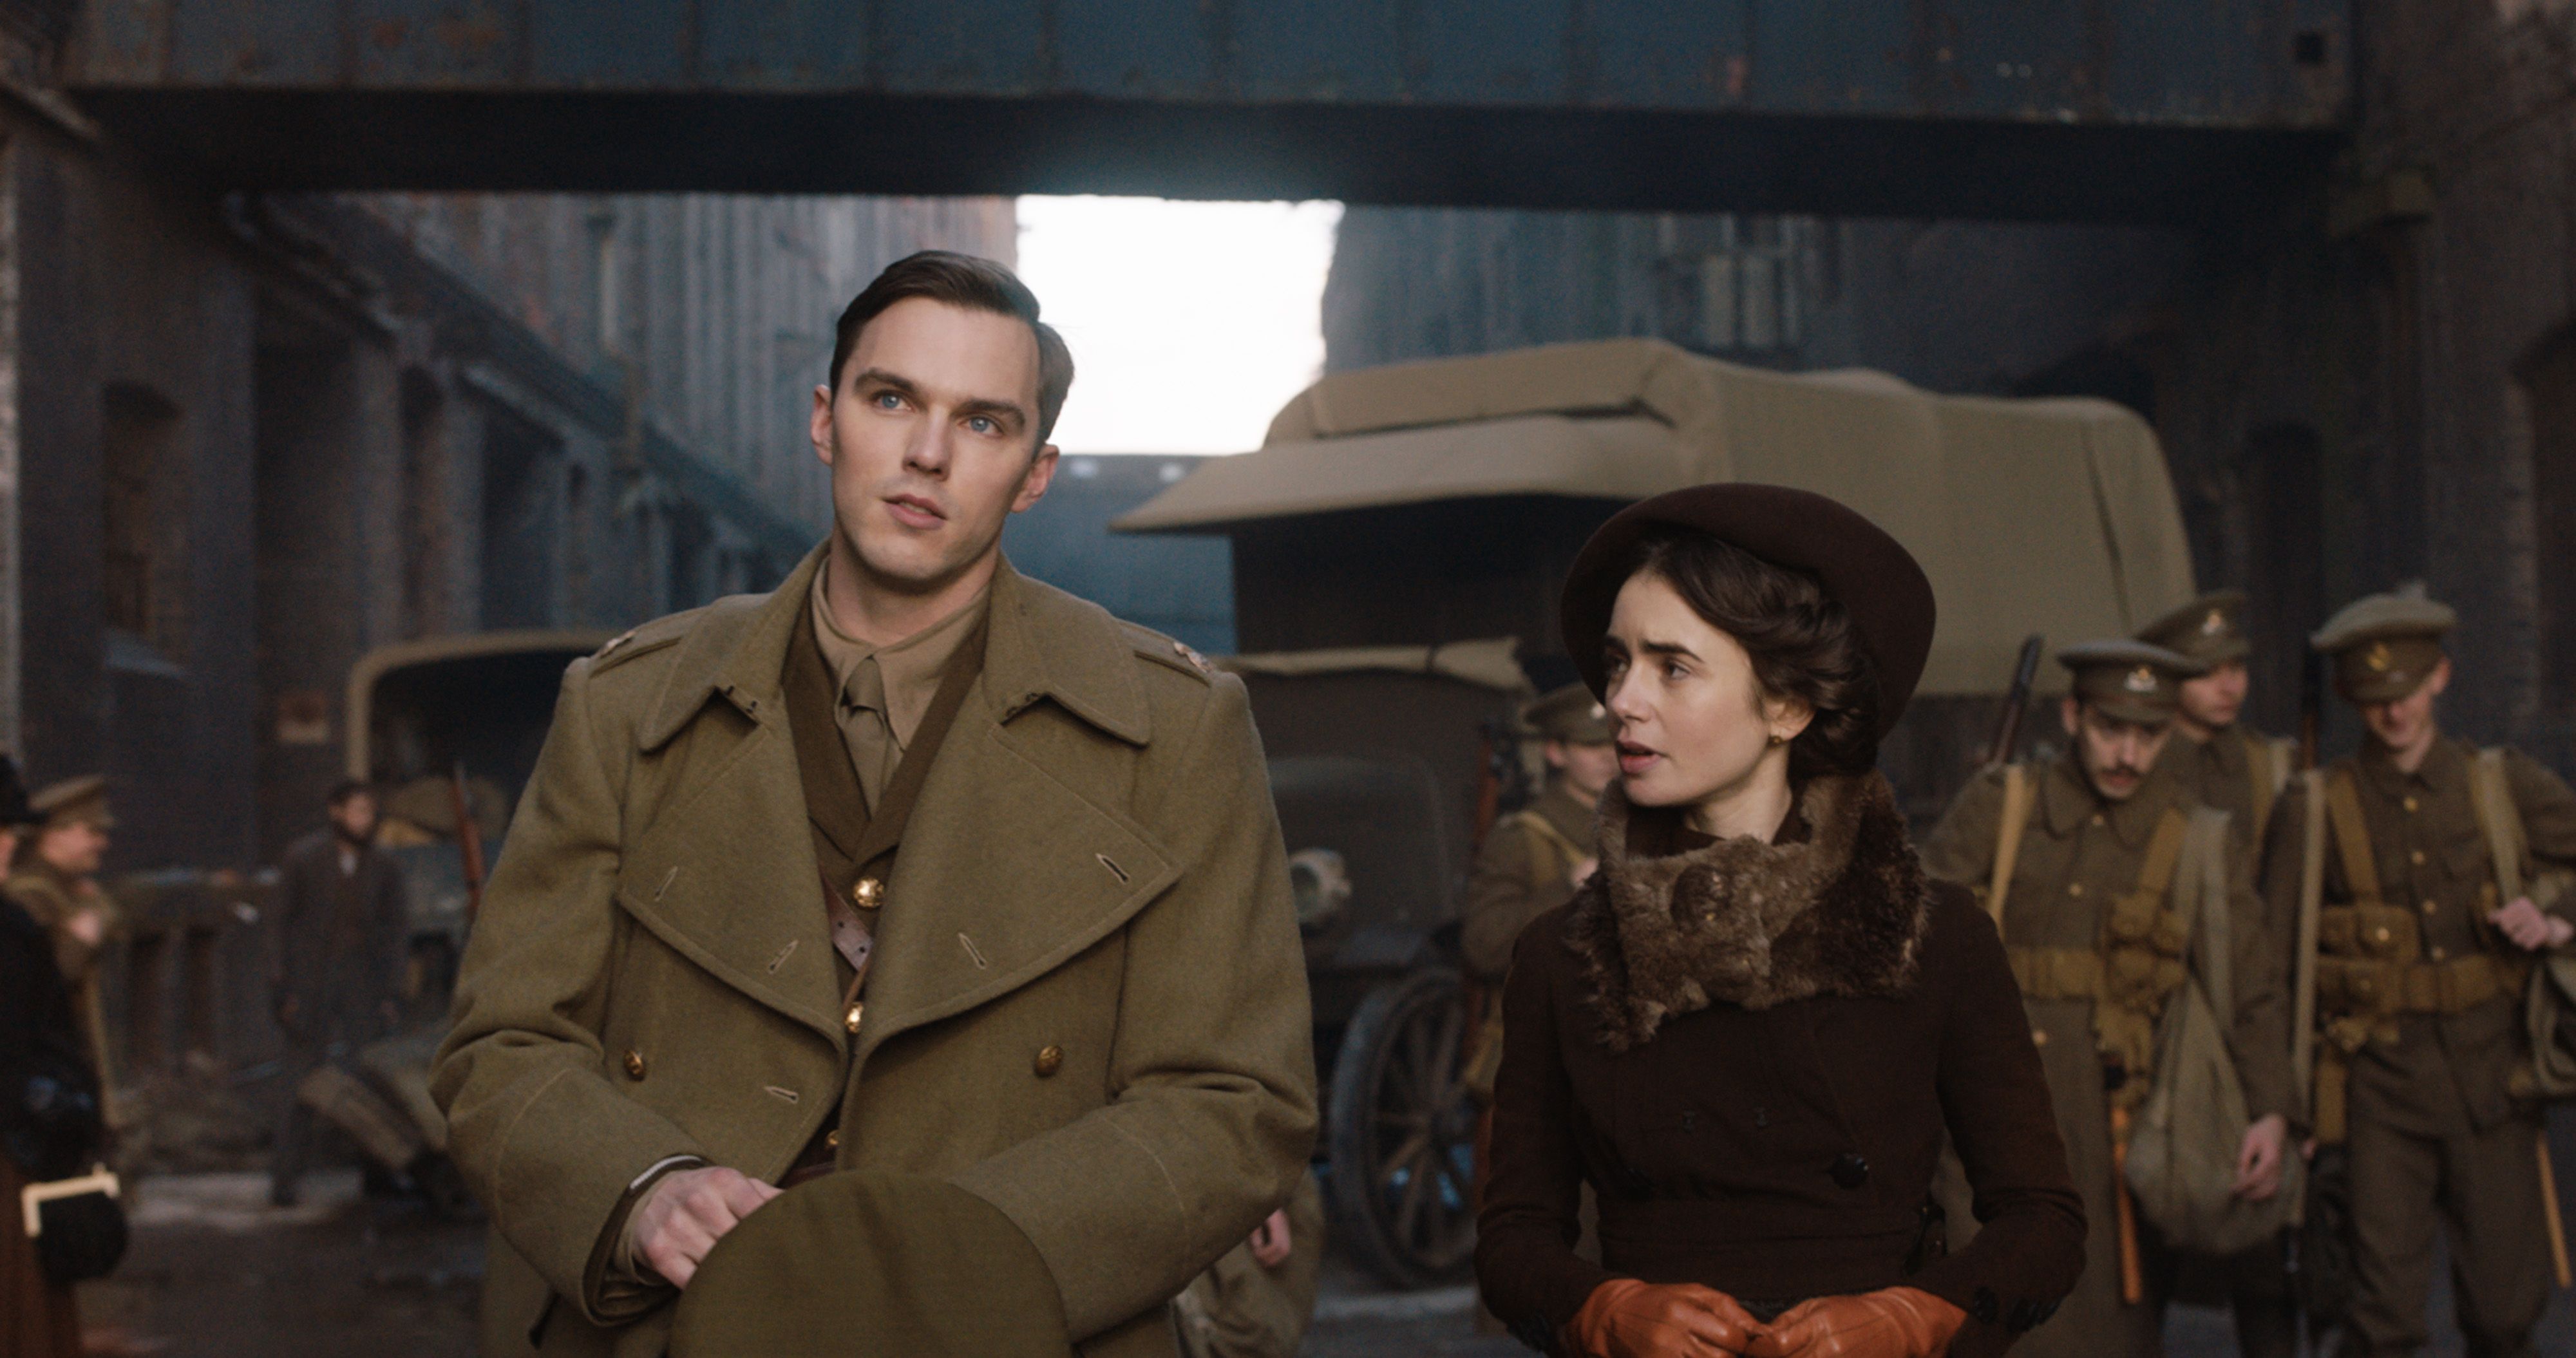 Nicholas Hoult &amp; Lily Collins in "Tolkien"